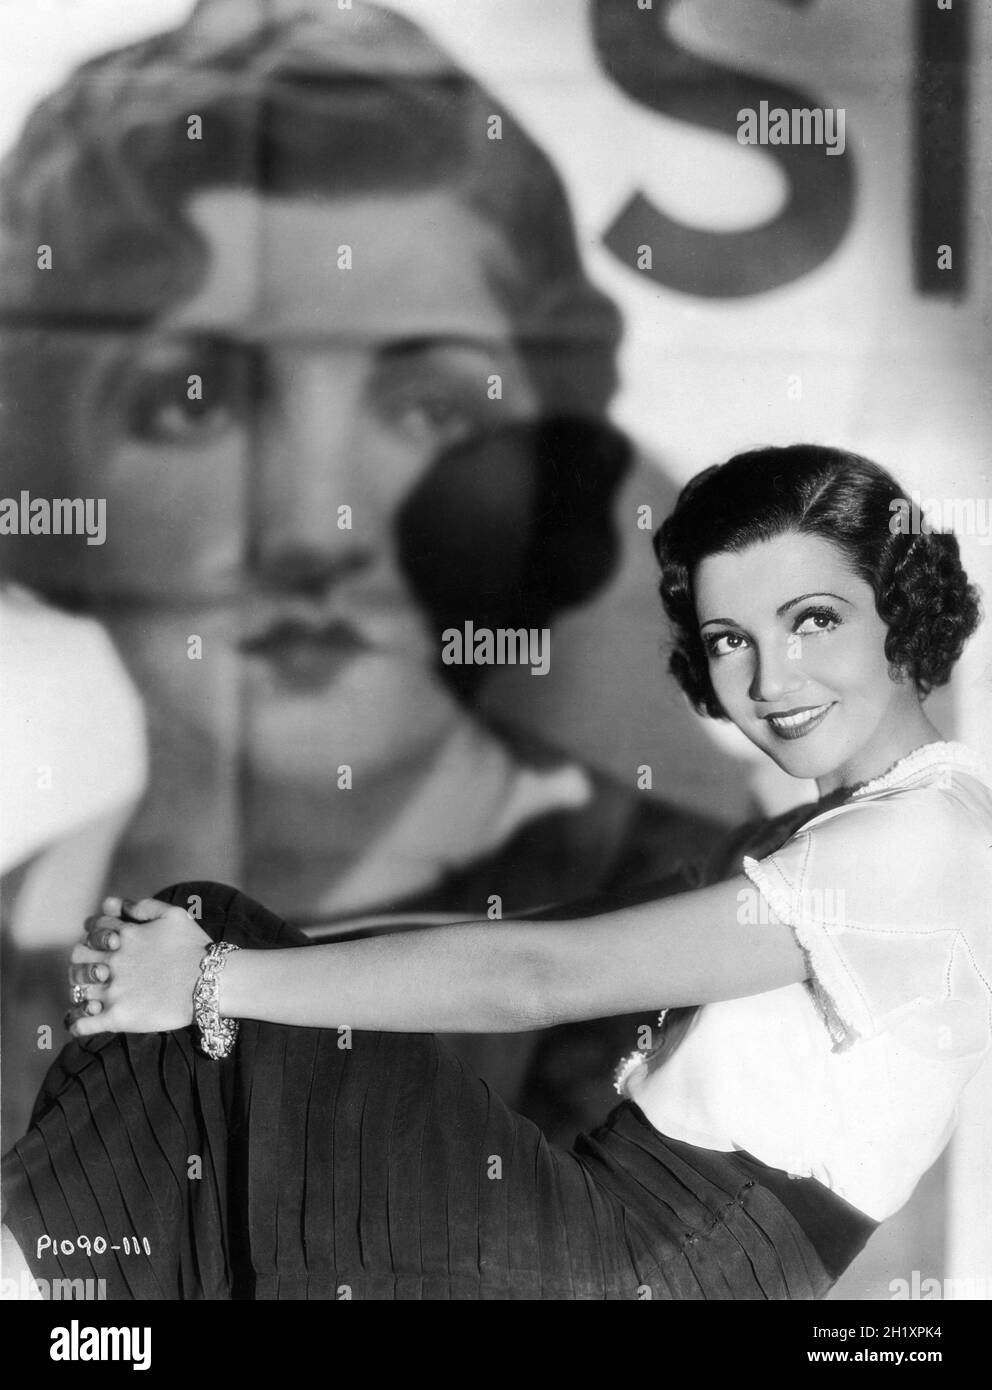 CLAUDETTE COLBERT Portrait in front of large movie poster for her film TORCH SINGER 1933 directors ALEXANDER HALL and GEORGE SOMNES costume design Travis Banton Paramount Pictures Stock Photo